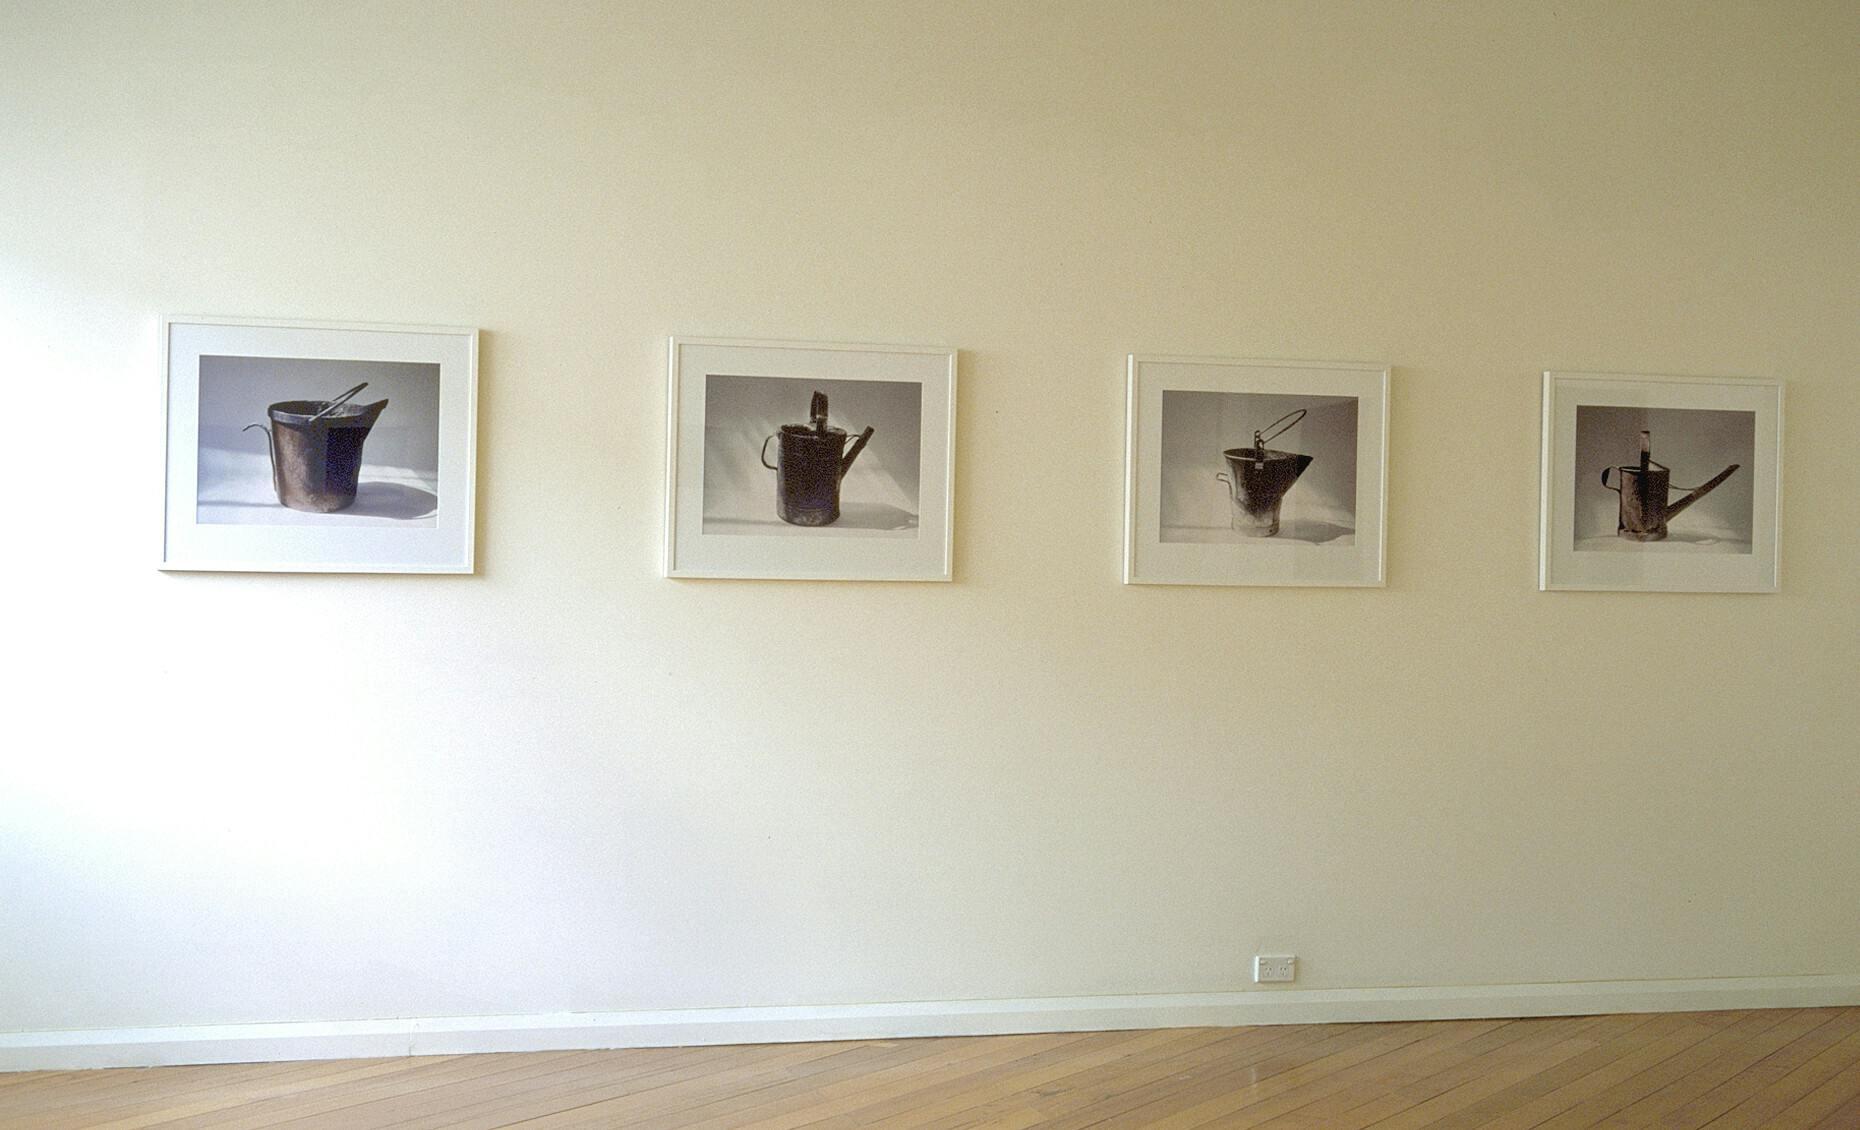 Installation view of Used-up Tool (pails and watering cans) series